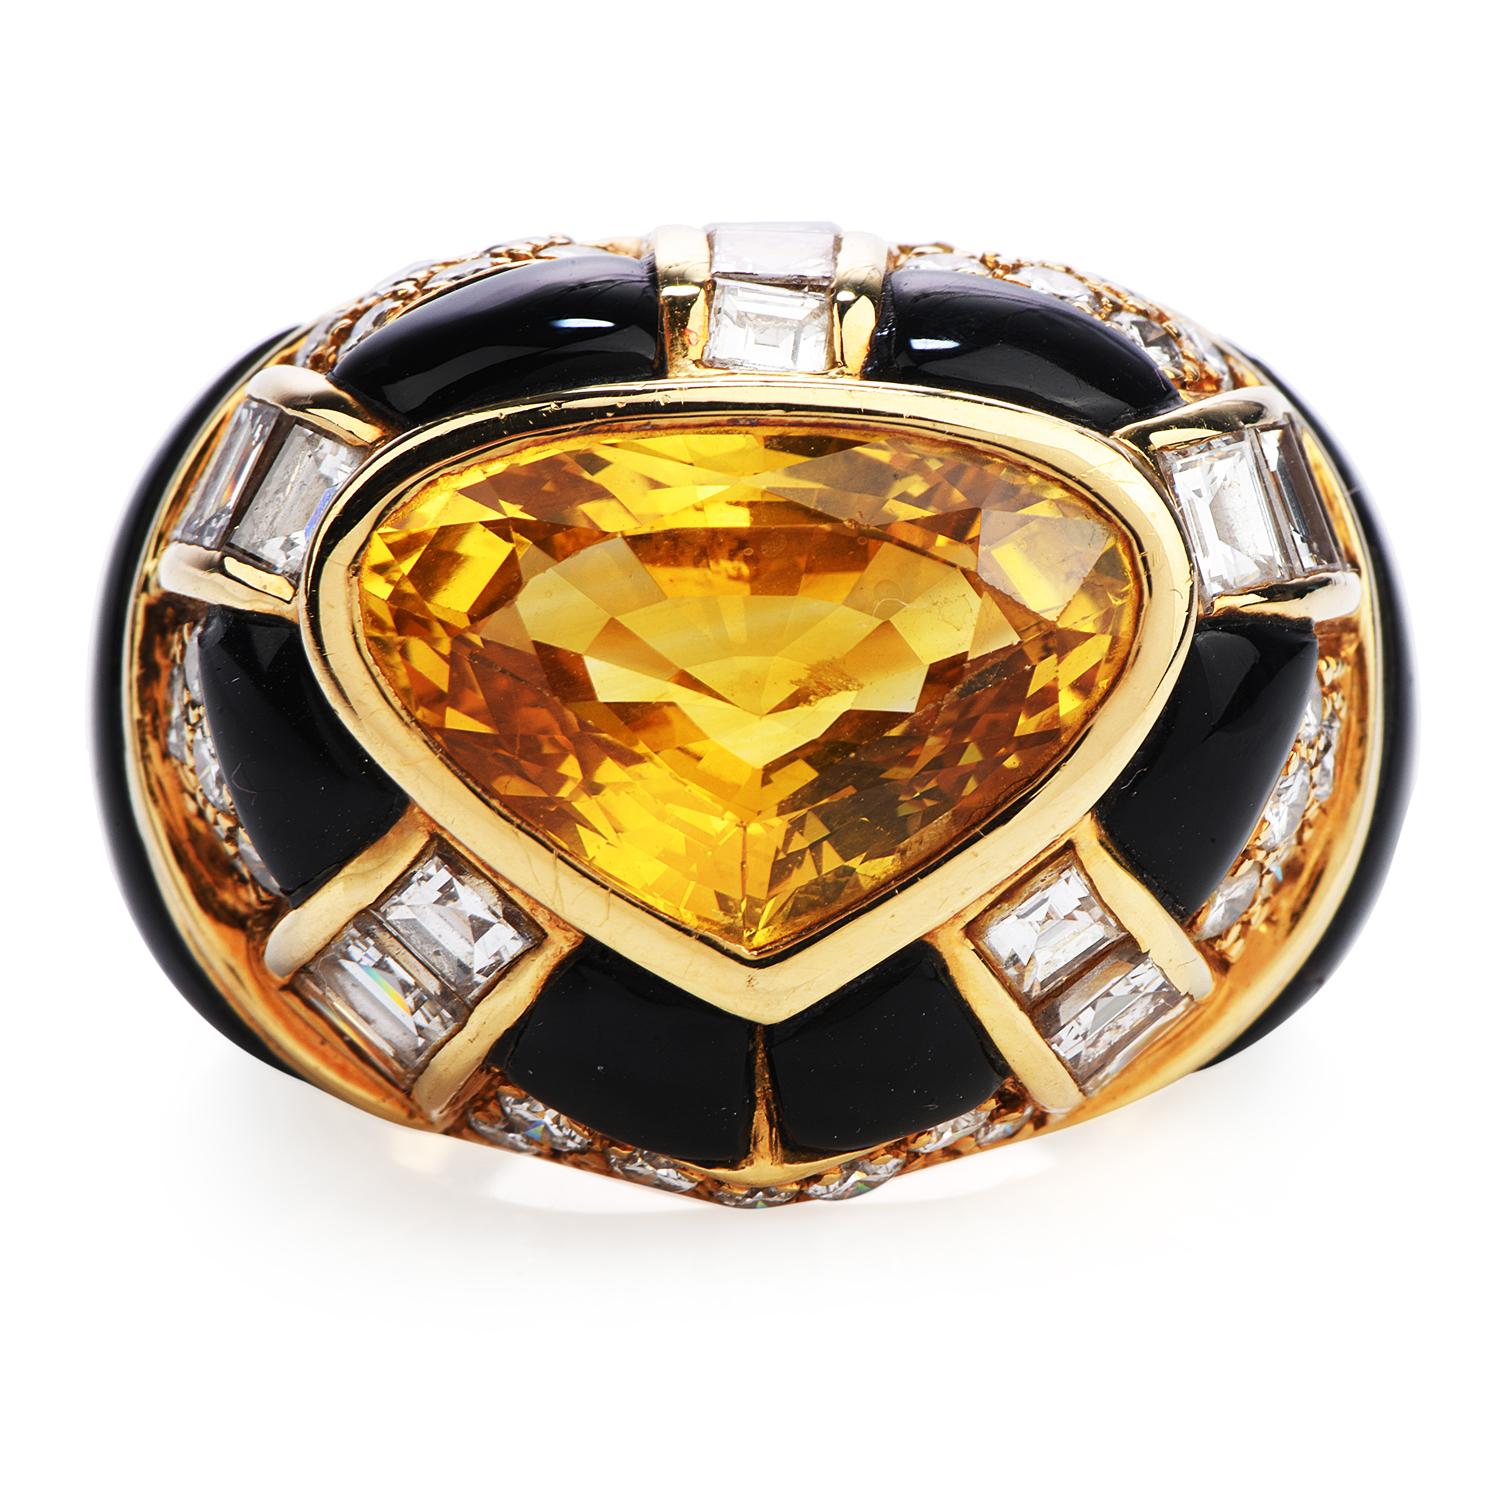  This vintage 1980's  wide GIA certified Sri Lankan Yellow Sapphire & Diamond ring is the perfect statement ring.

Crafted in solid heavy 18K yellow gold, the center is adorned by a GIA certified Yellow Sapphire, from Sri Lanka, with heat treatment,